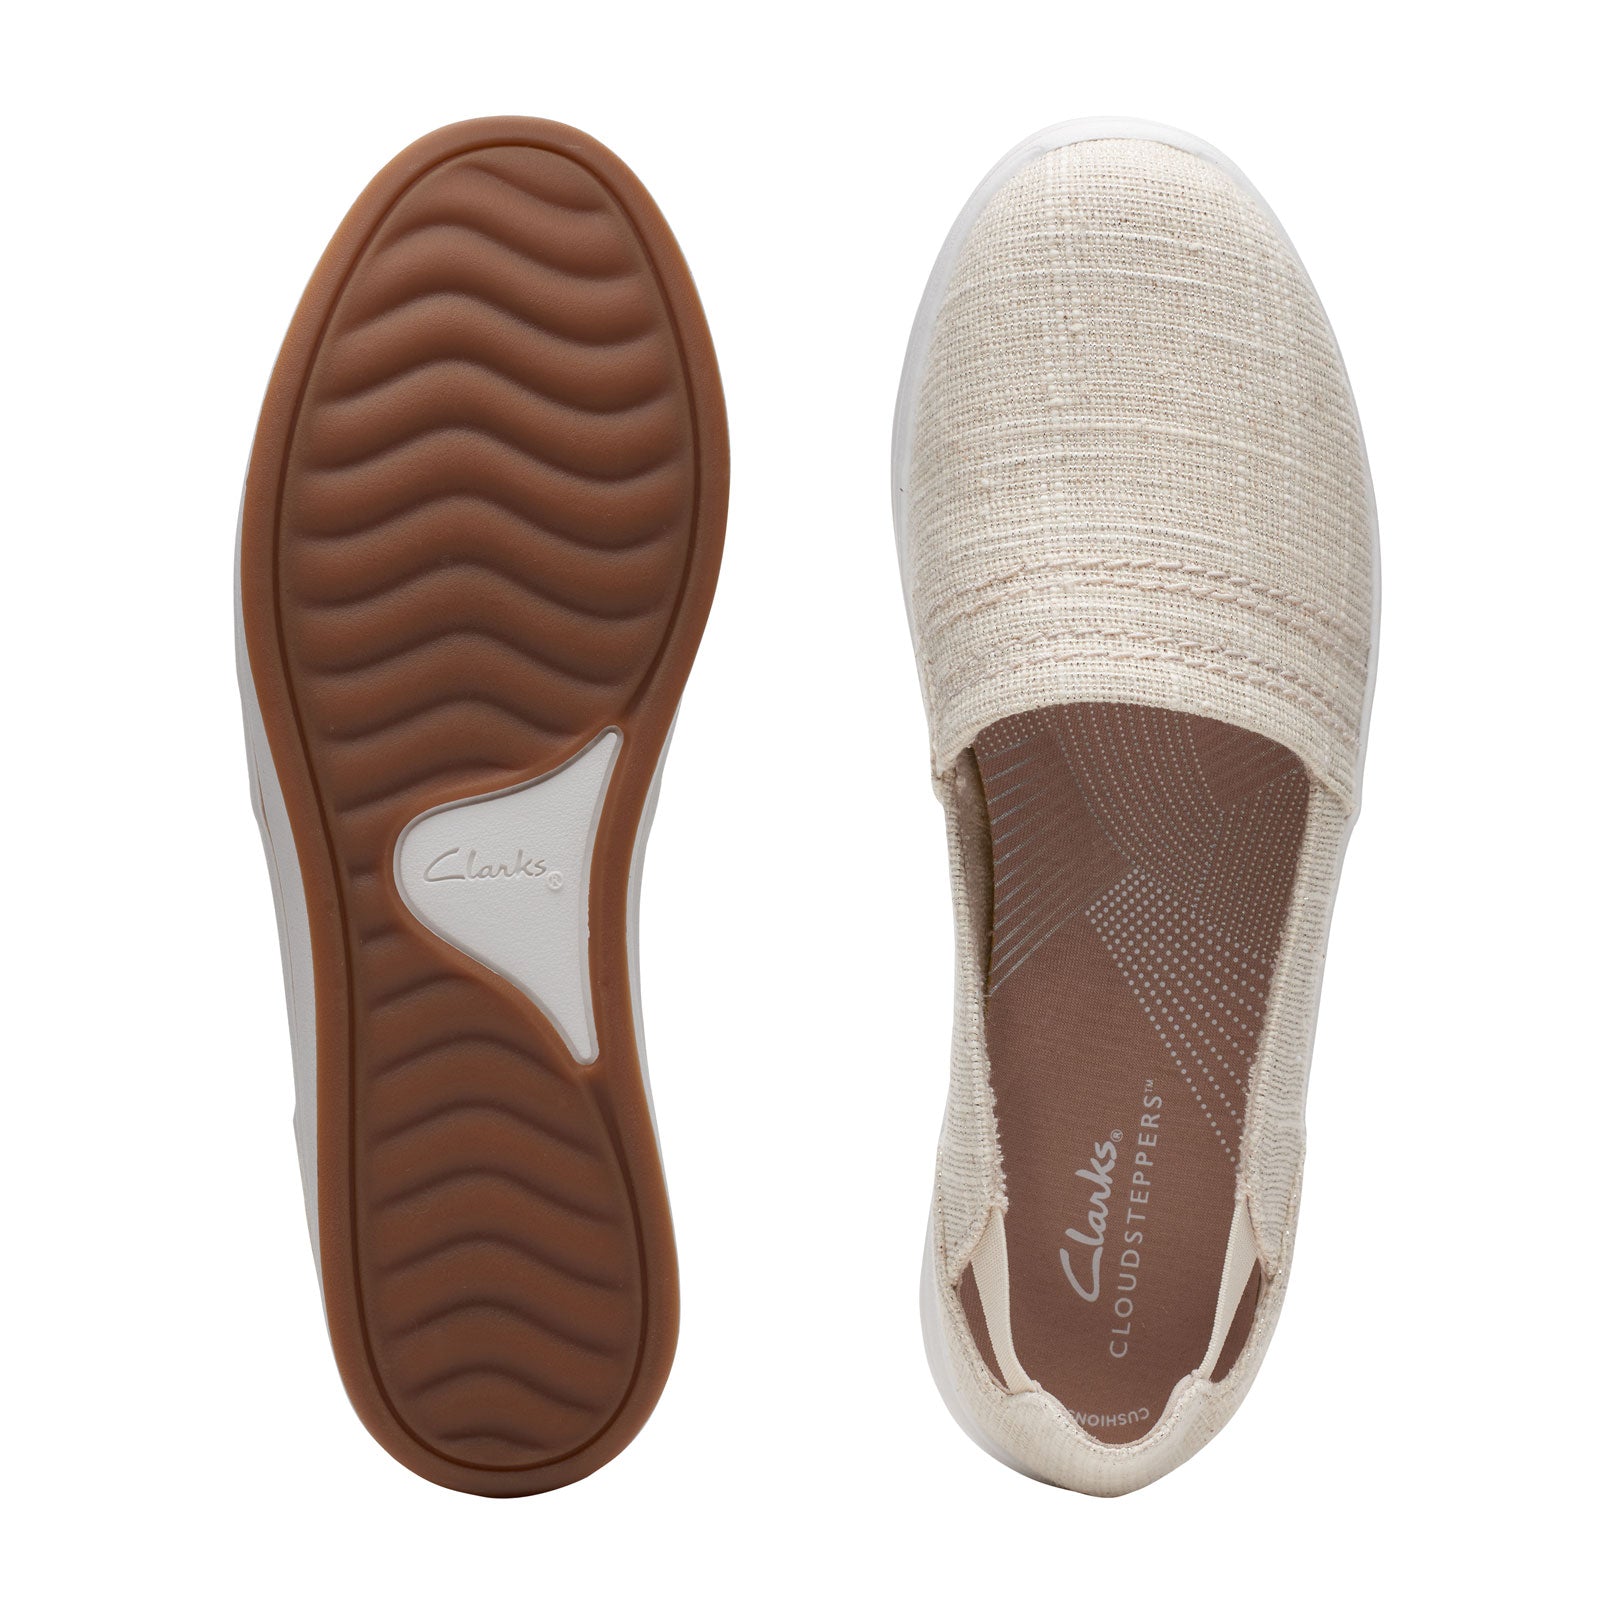 Clarks Step Slip On - Natural Interest - The Heel Shoe Fitters